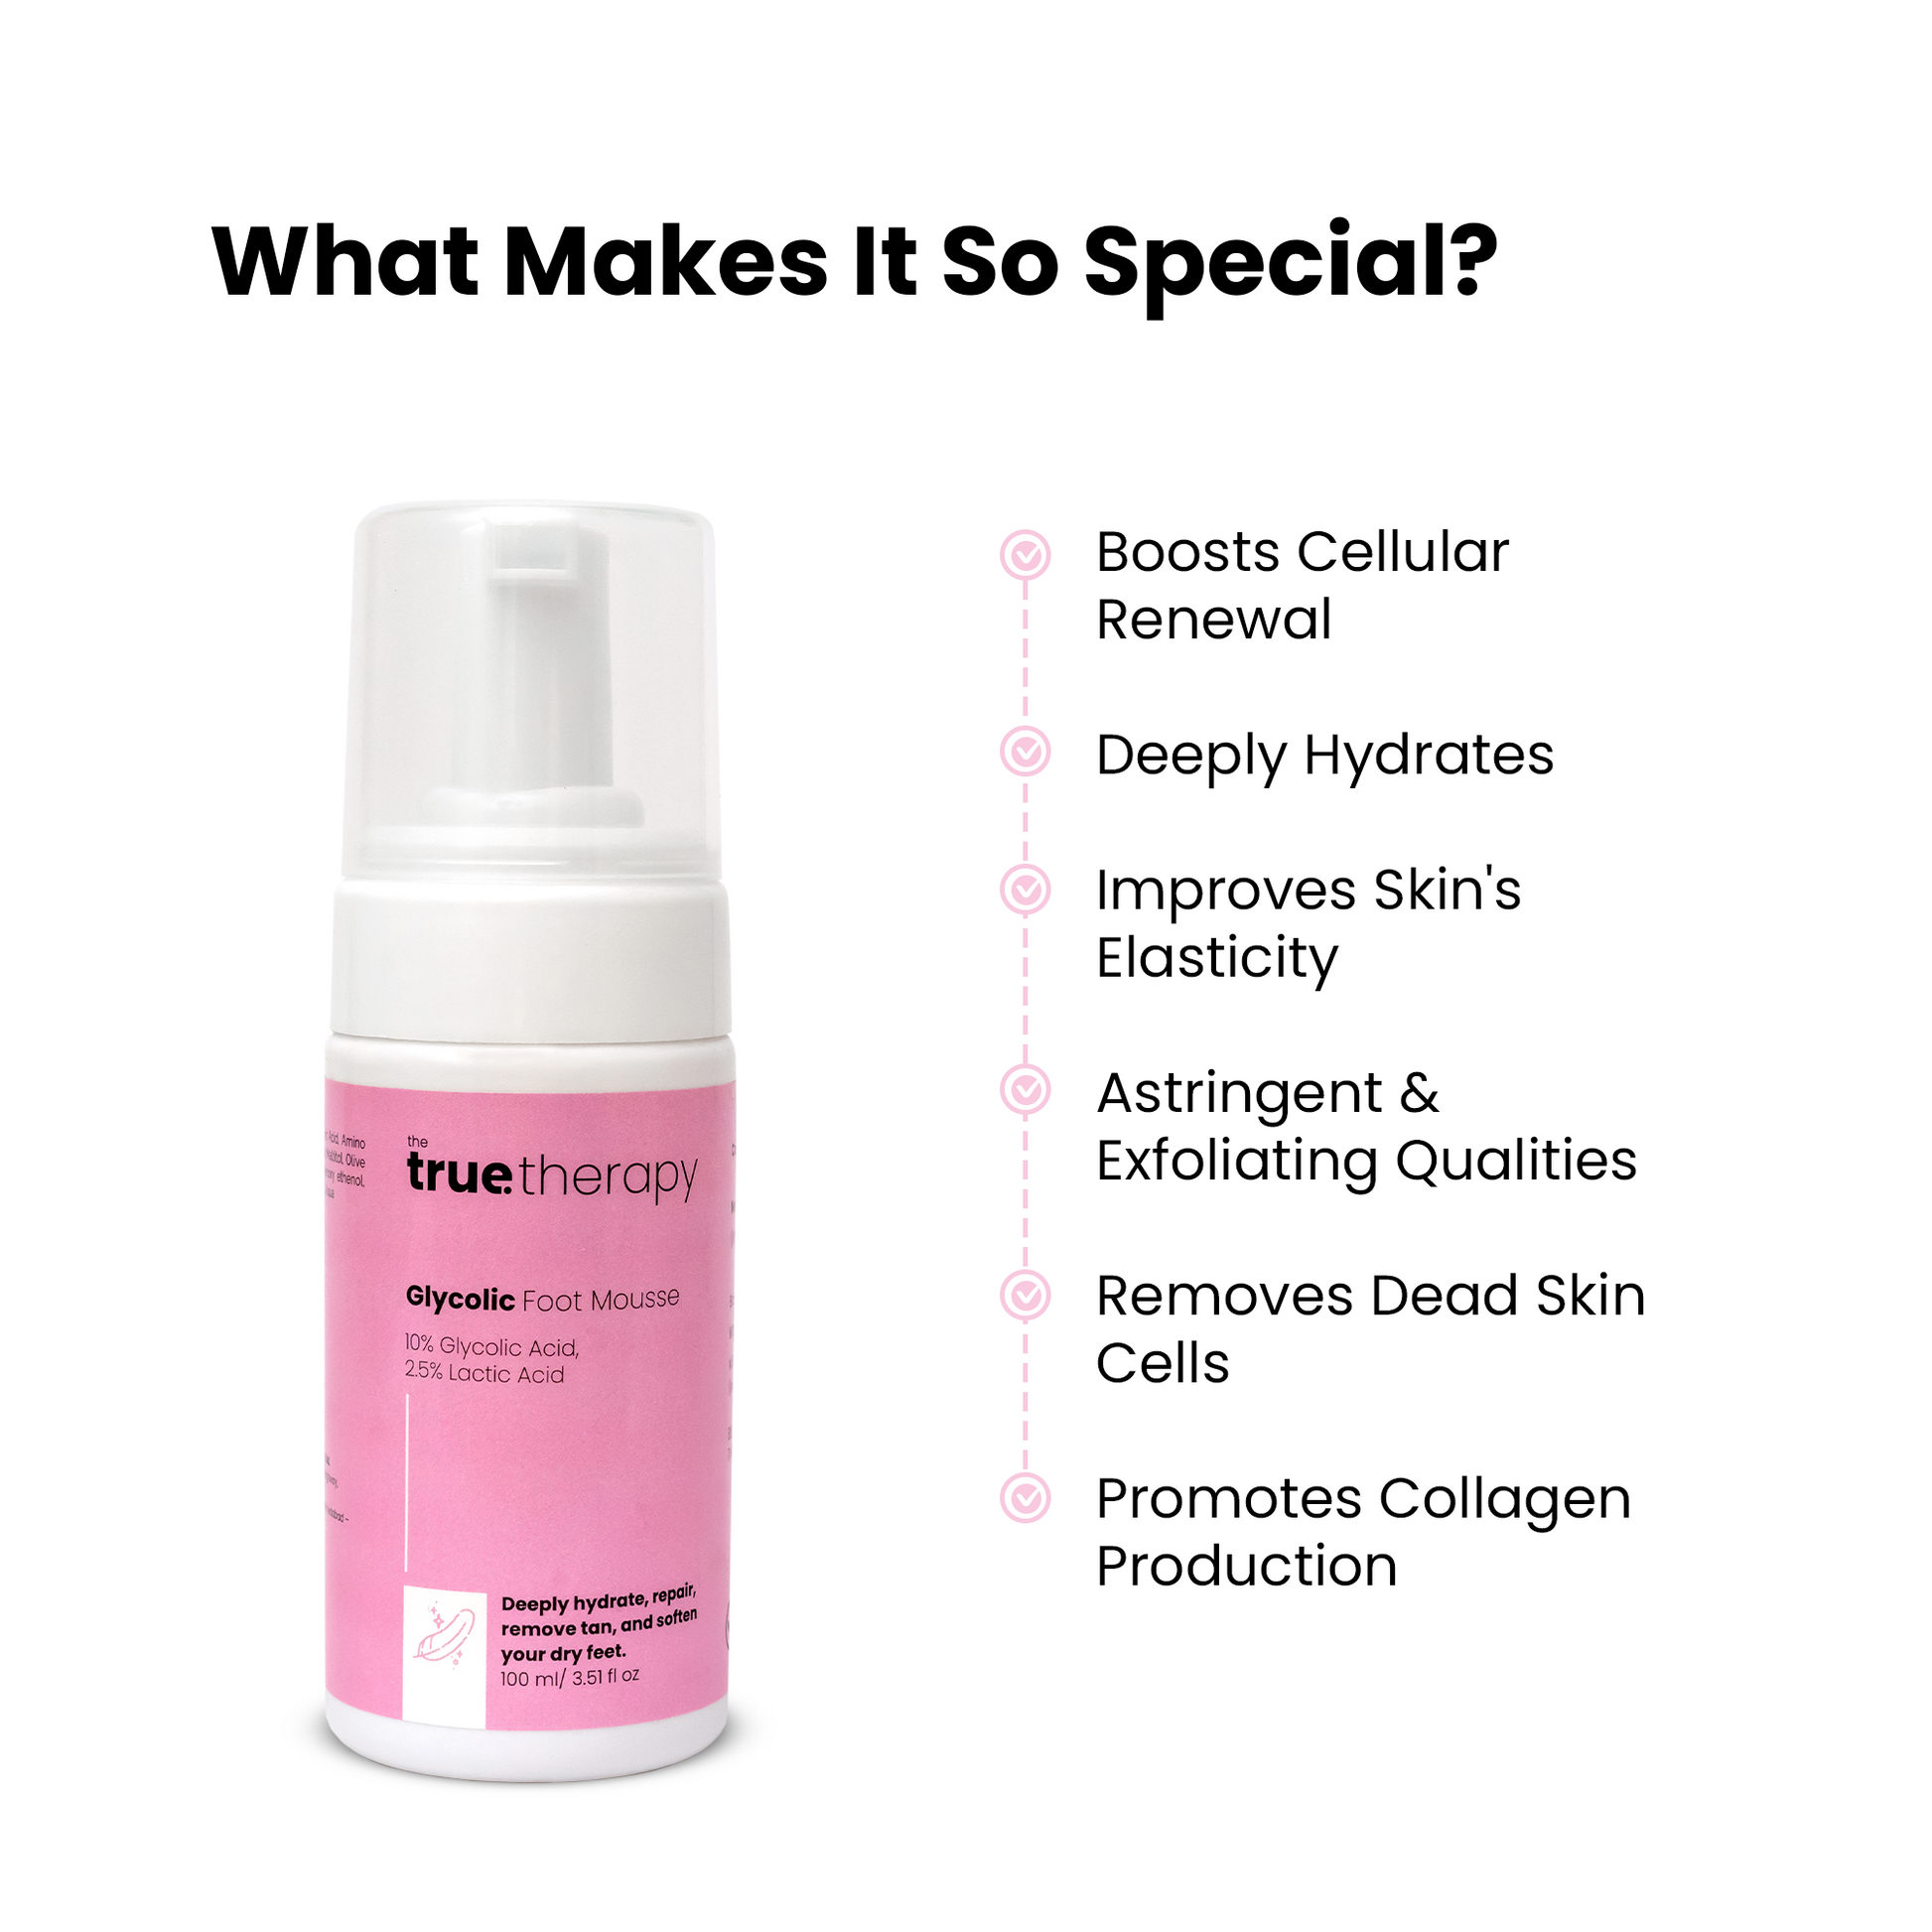 10% Glycolic Acid+2.5% Lactic Acid Foot Mousse Benefits | The True Therapy